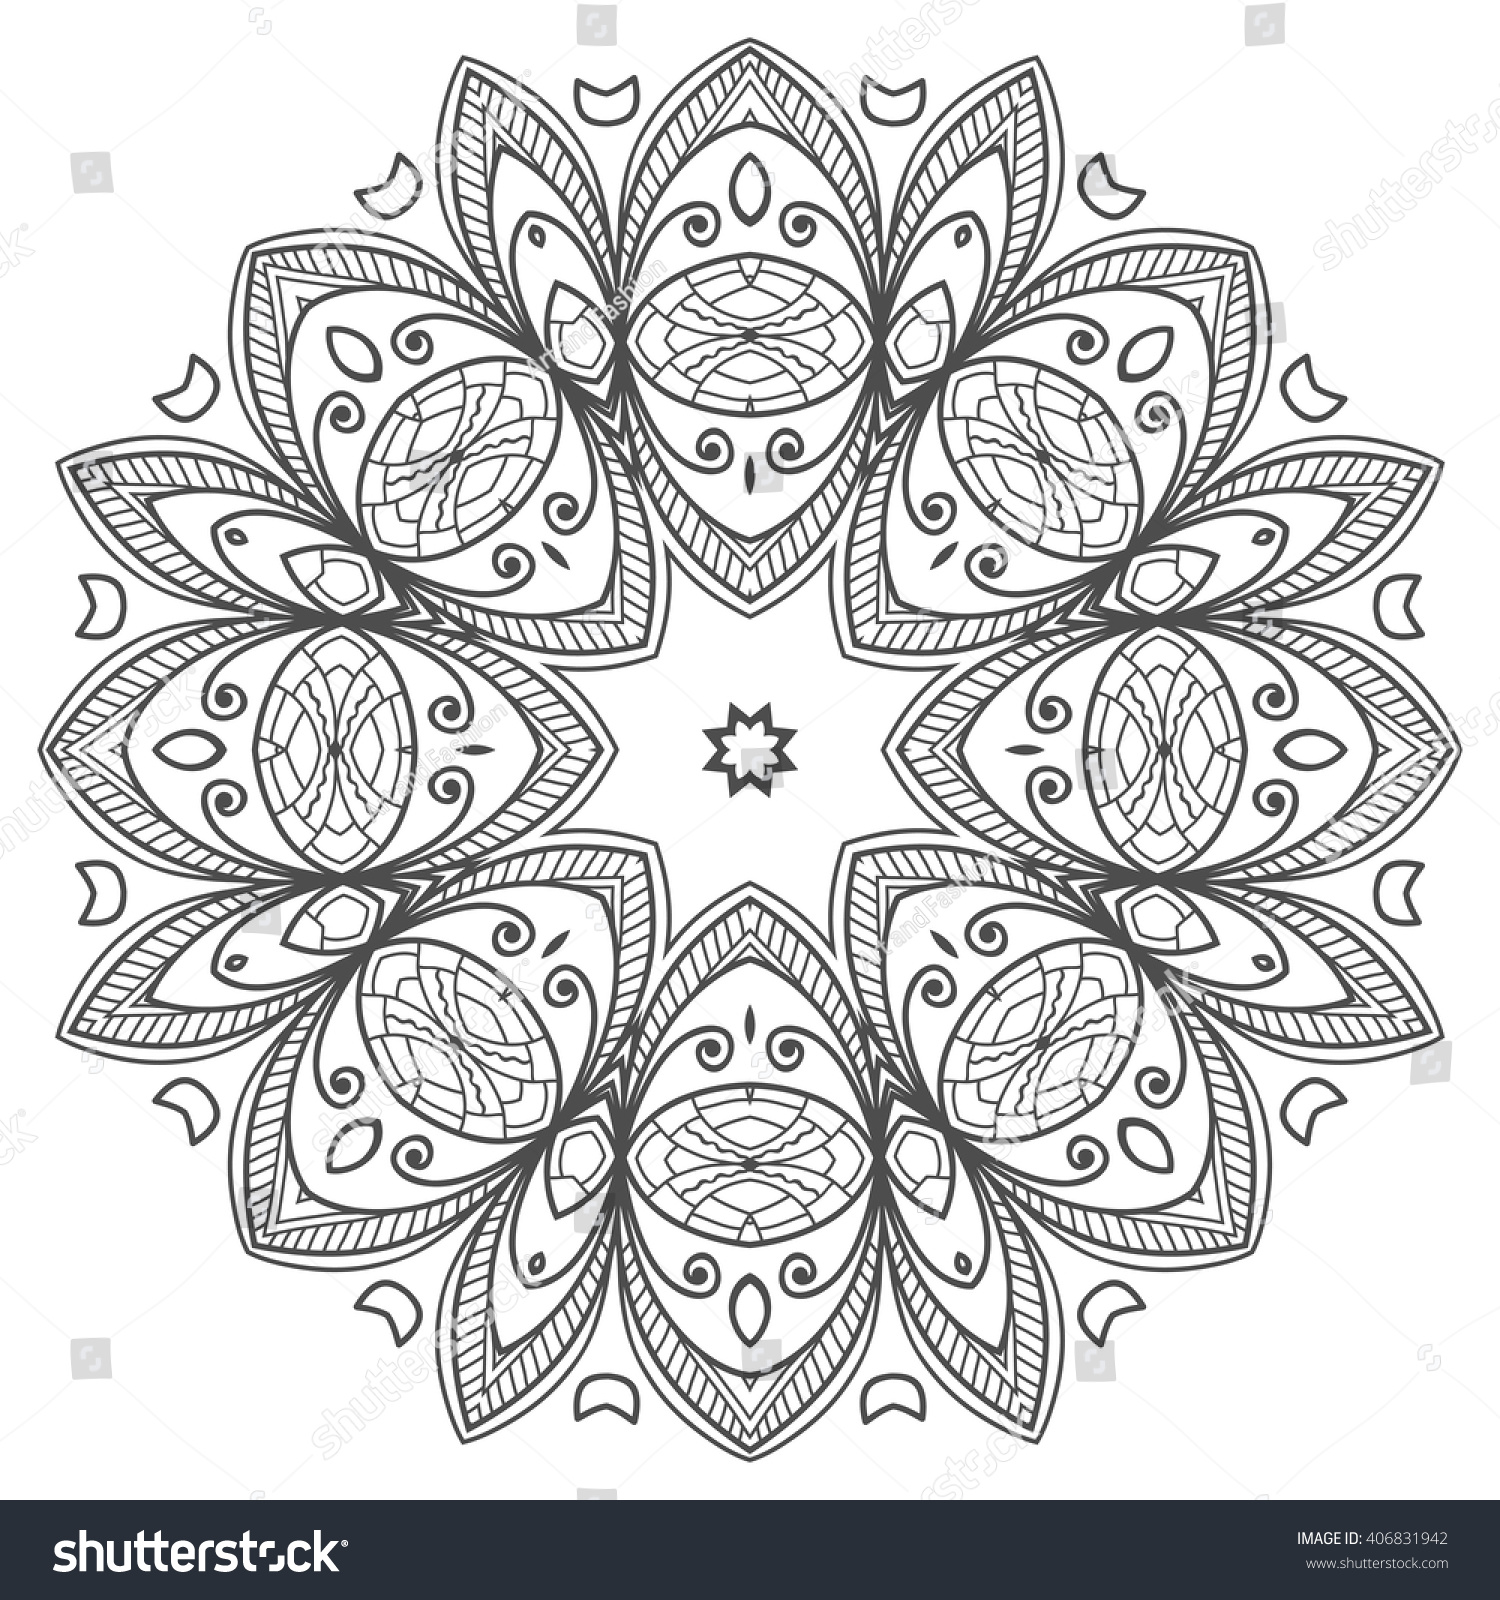 Mandala geometric floral design element Zentangle style art for adult coloring book Tribal ethnic